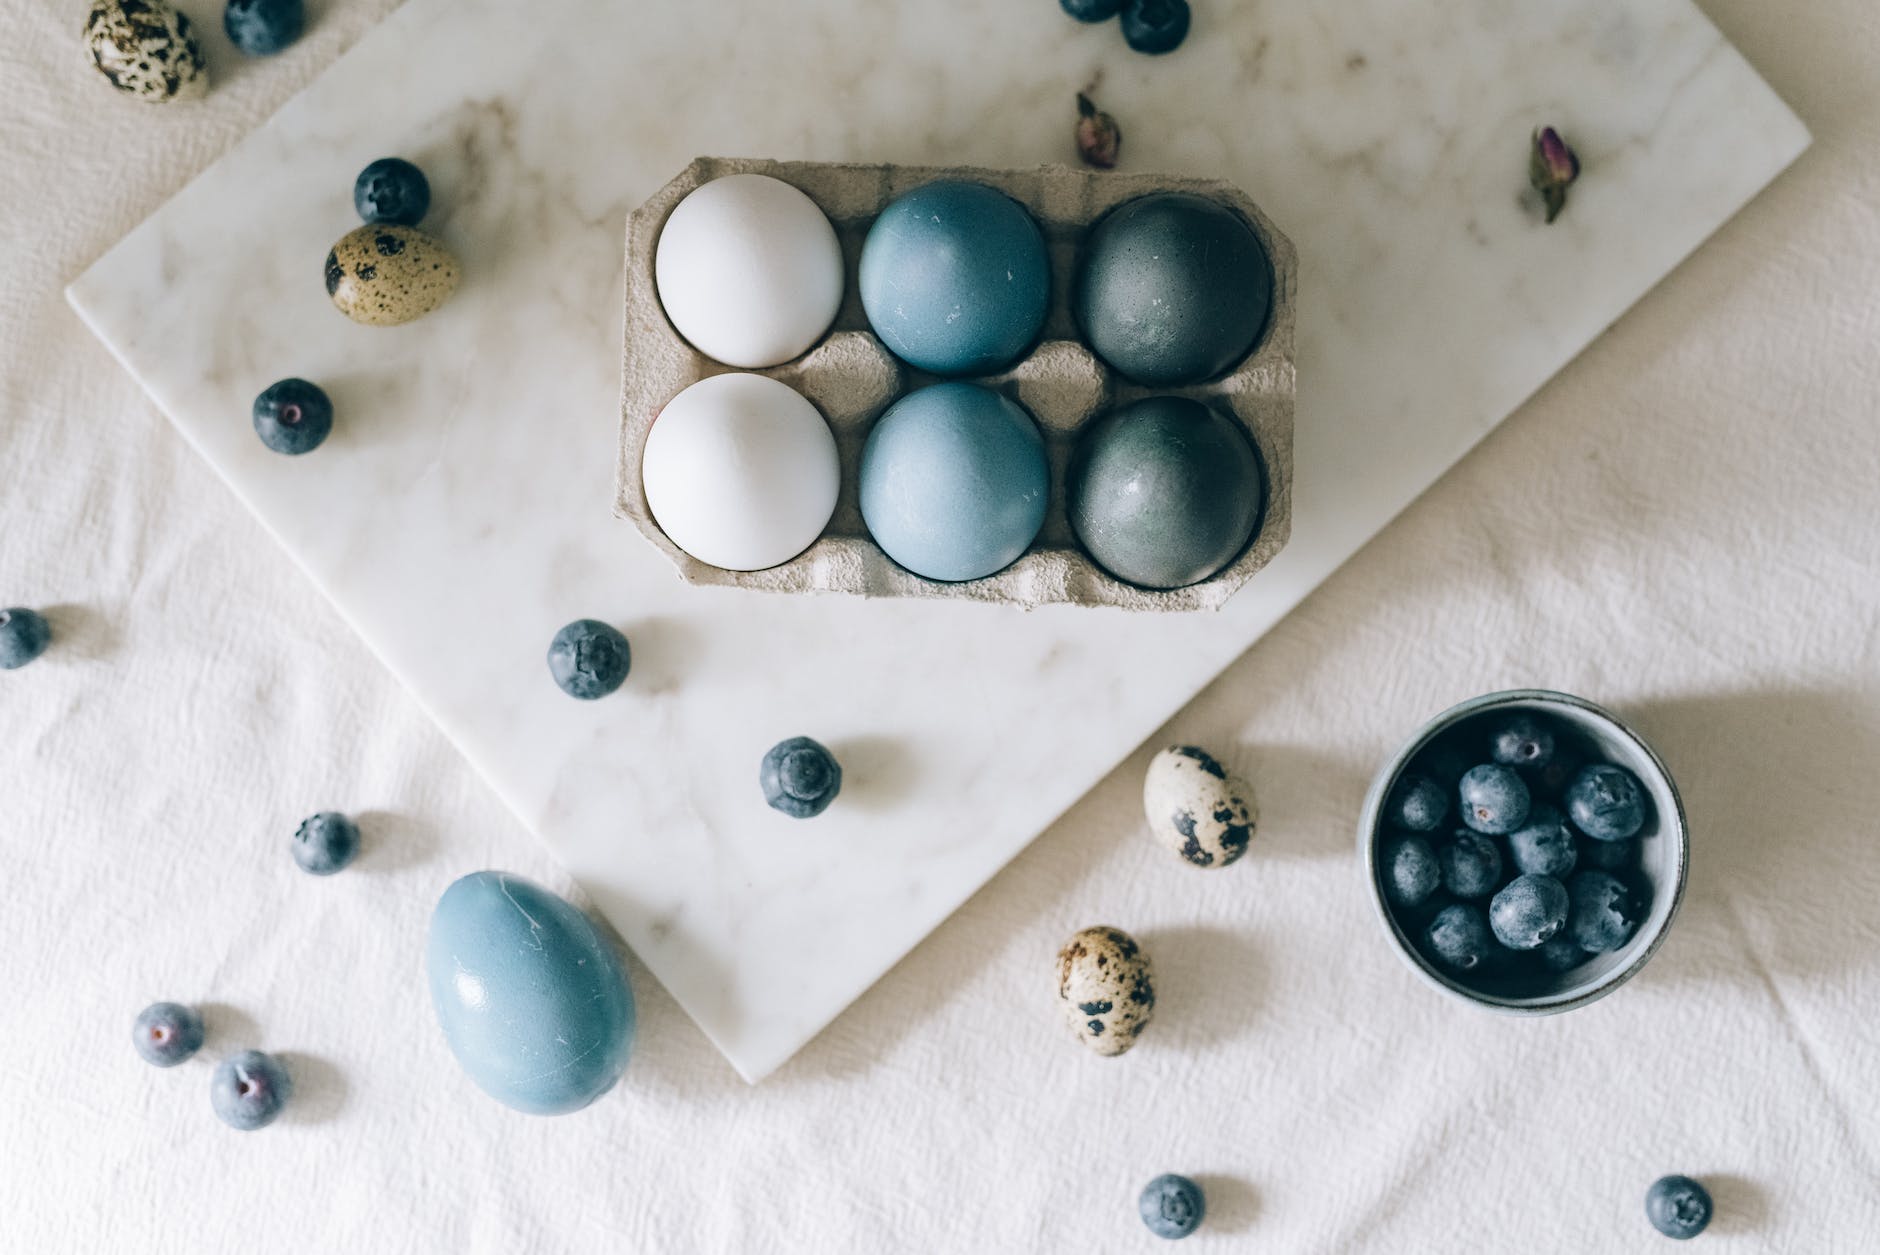 blue and white eggs in a carton